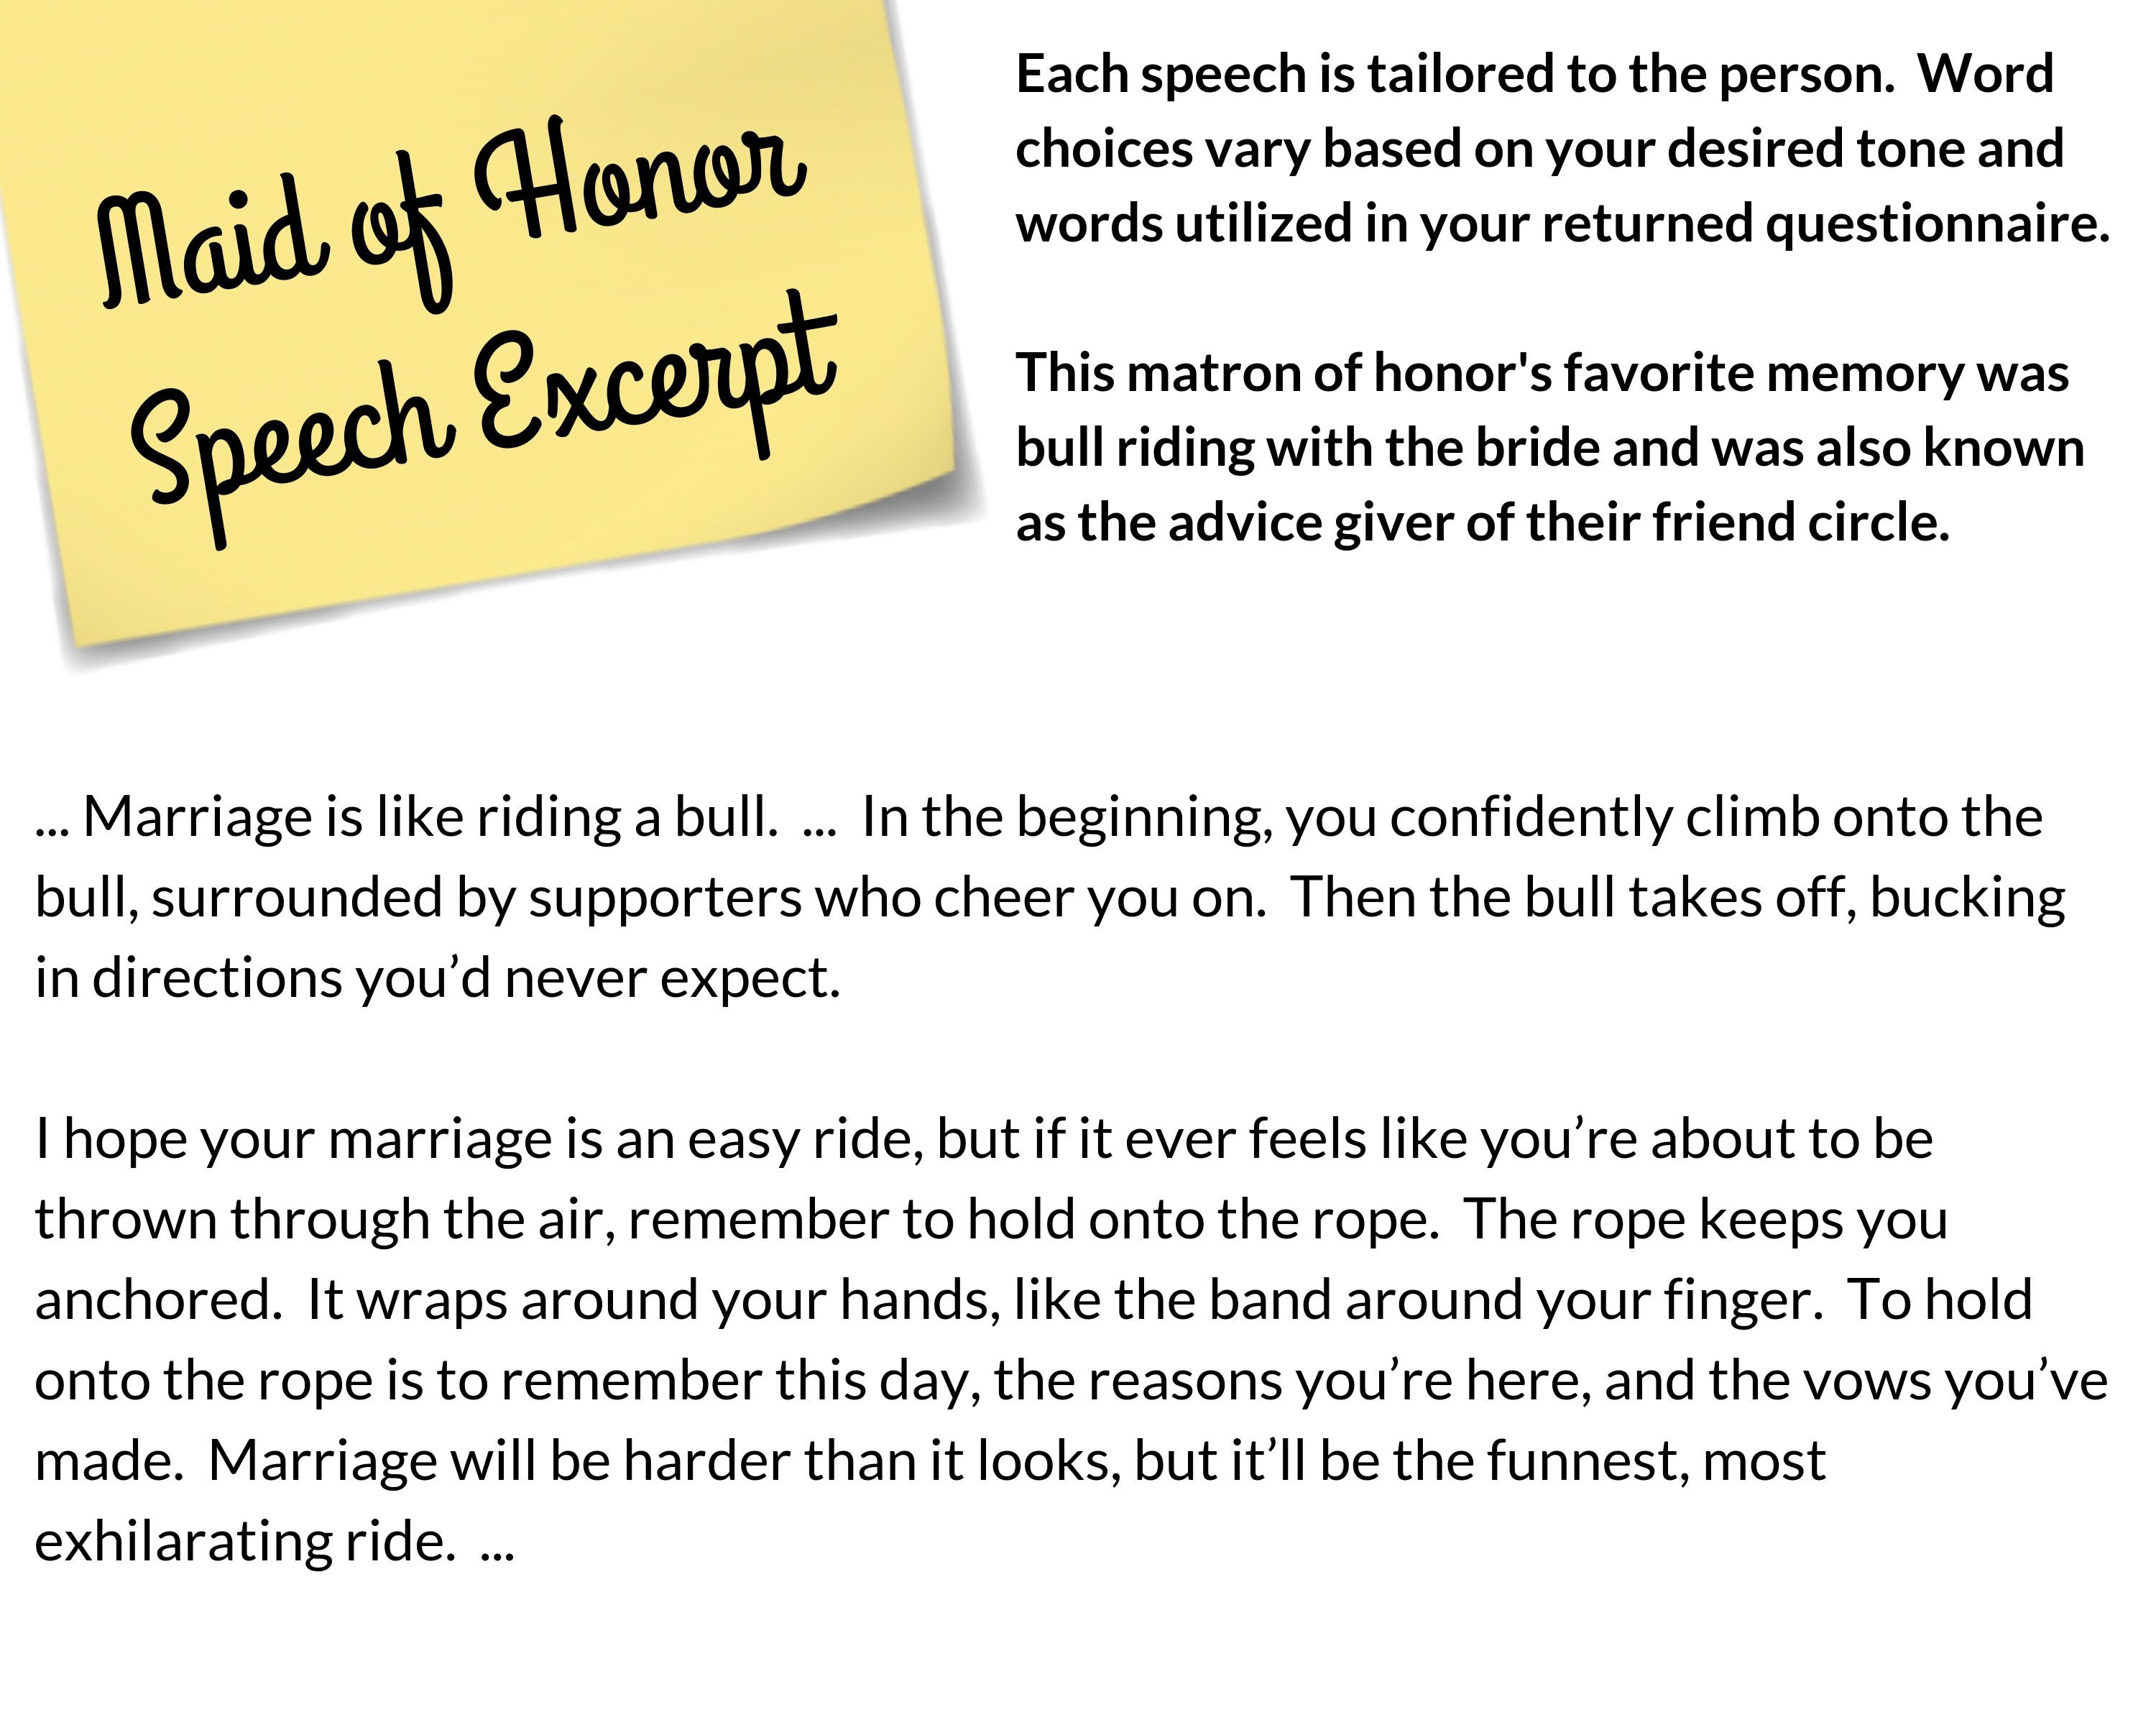 write a 400 word maid of honor speech to save you time and stress